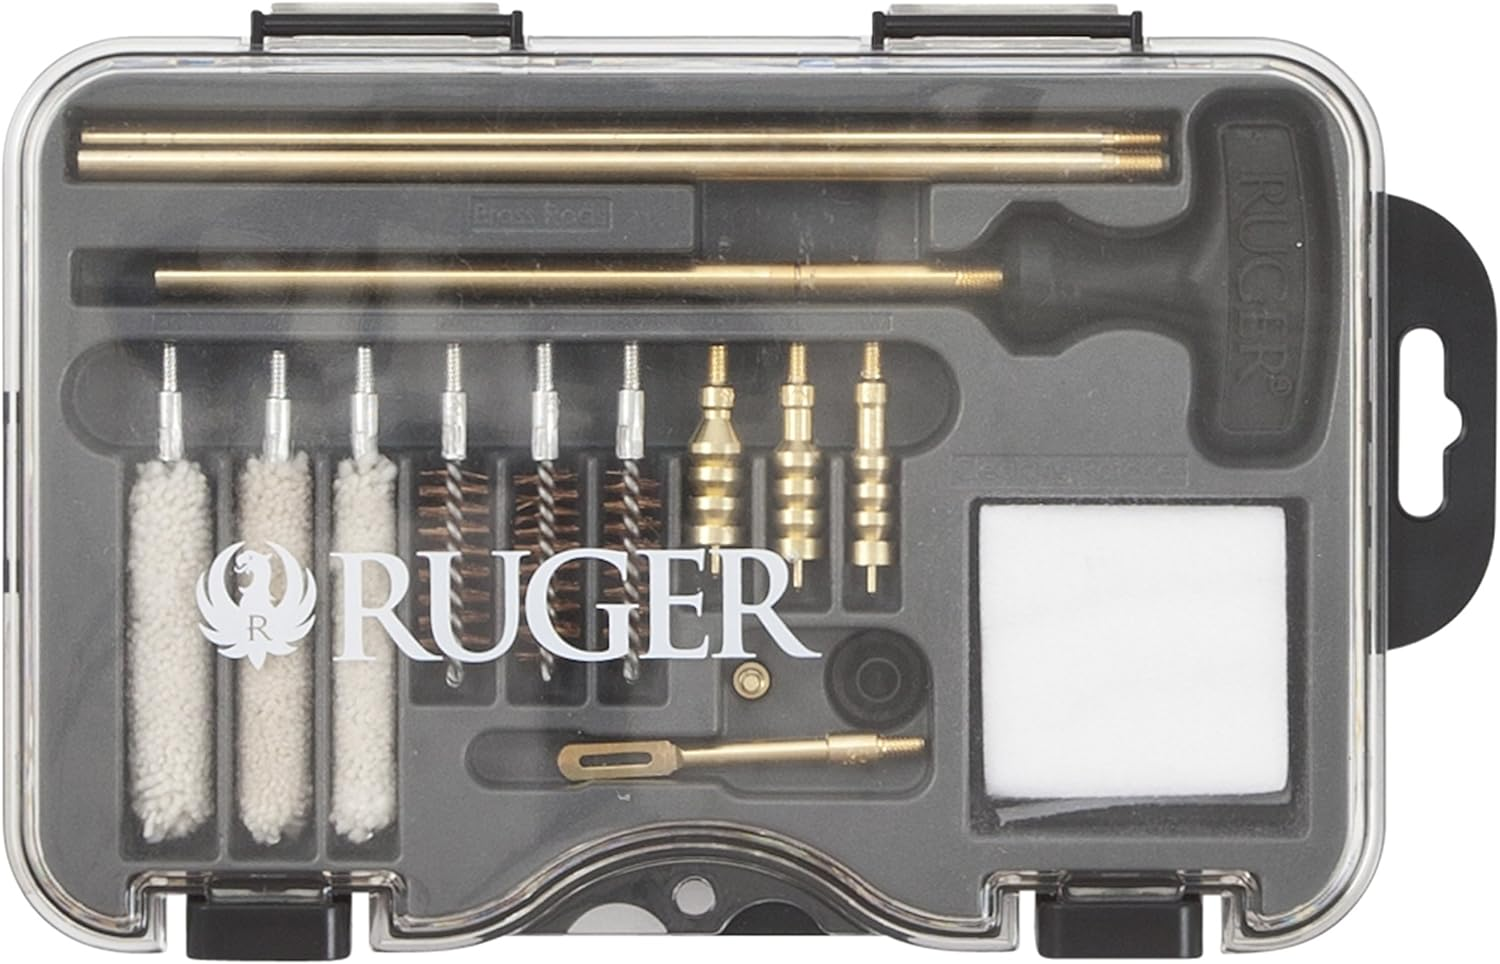 Amazon.com : Allen Company Ruger Rifle & Shotgun Cleaning Kit - Multi-Caliber Complete Gun Cleaning Kit - Gun Accessories, Gray : Sports & Outdoors $12.58